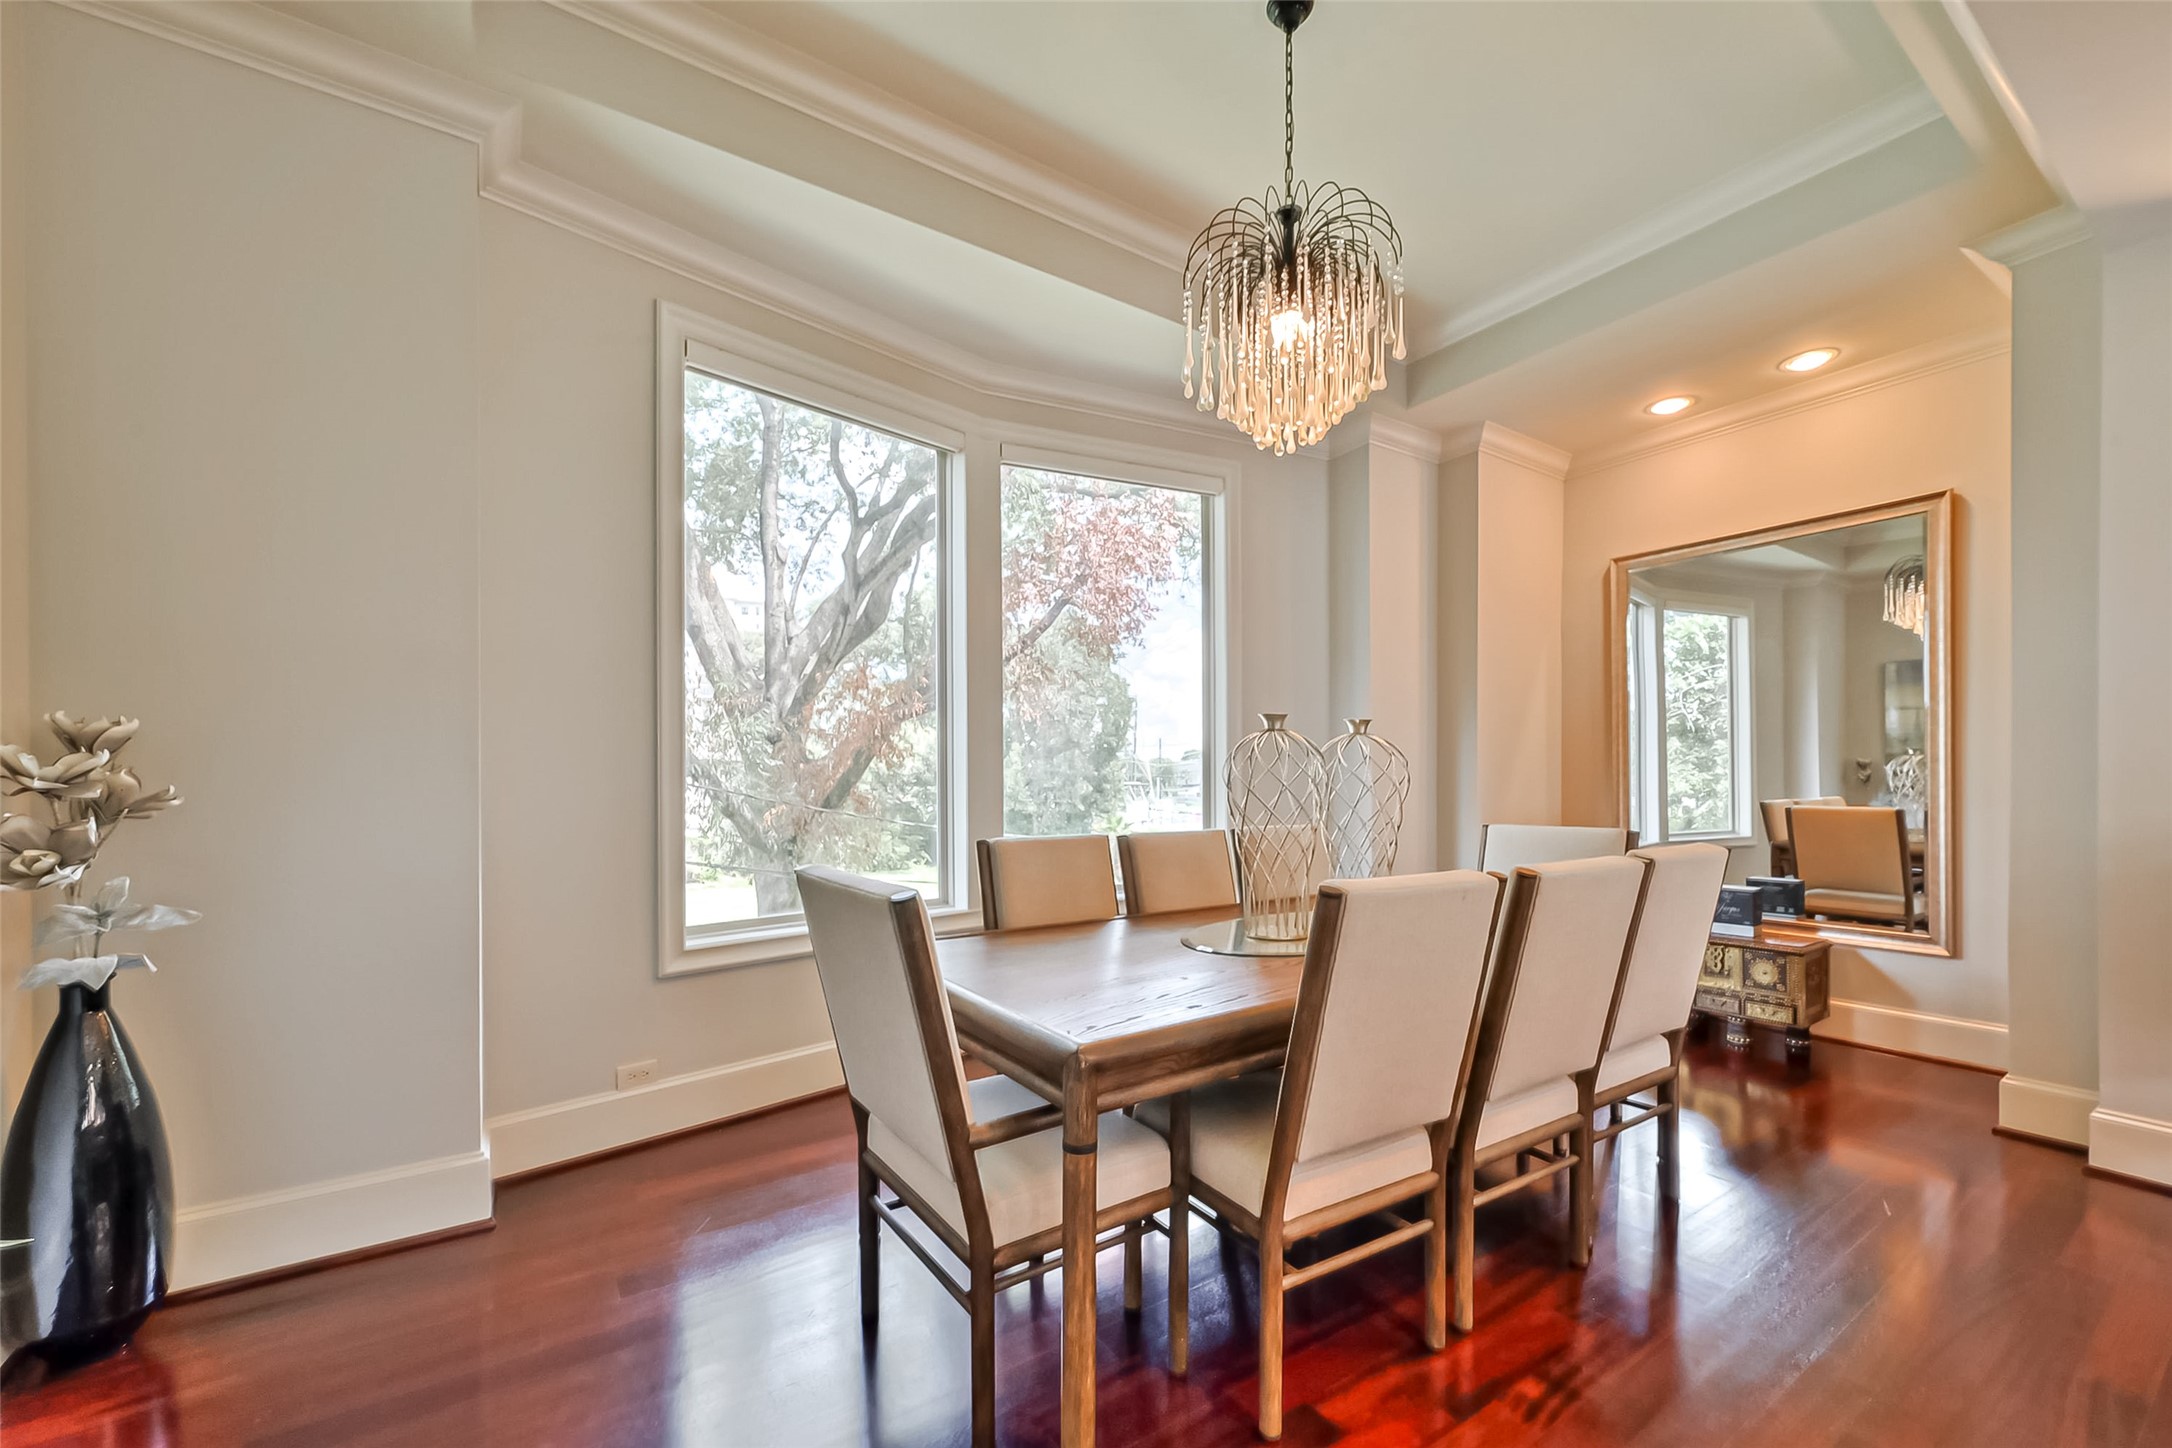 Host Family Dinners at 2701 West Ln. Double paned windows, crown molding, and brazilian hardwood floors.